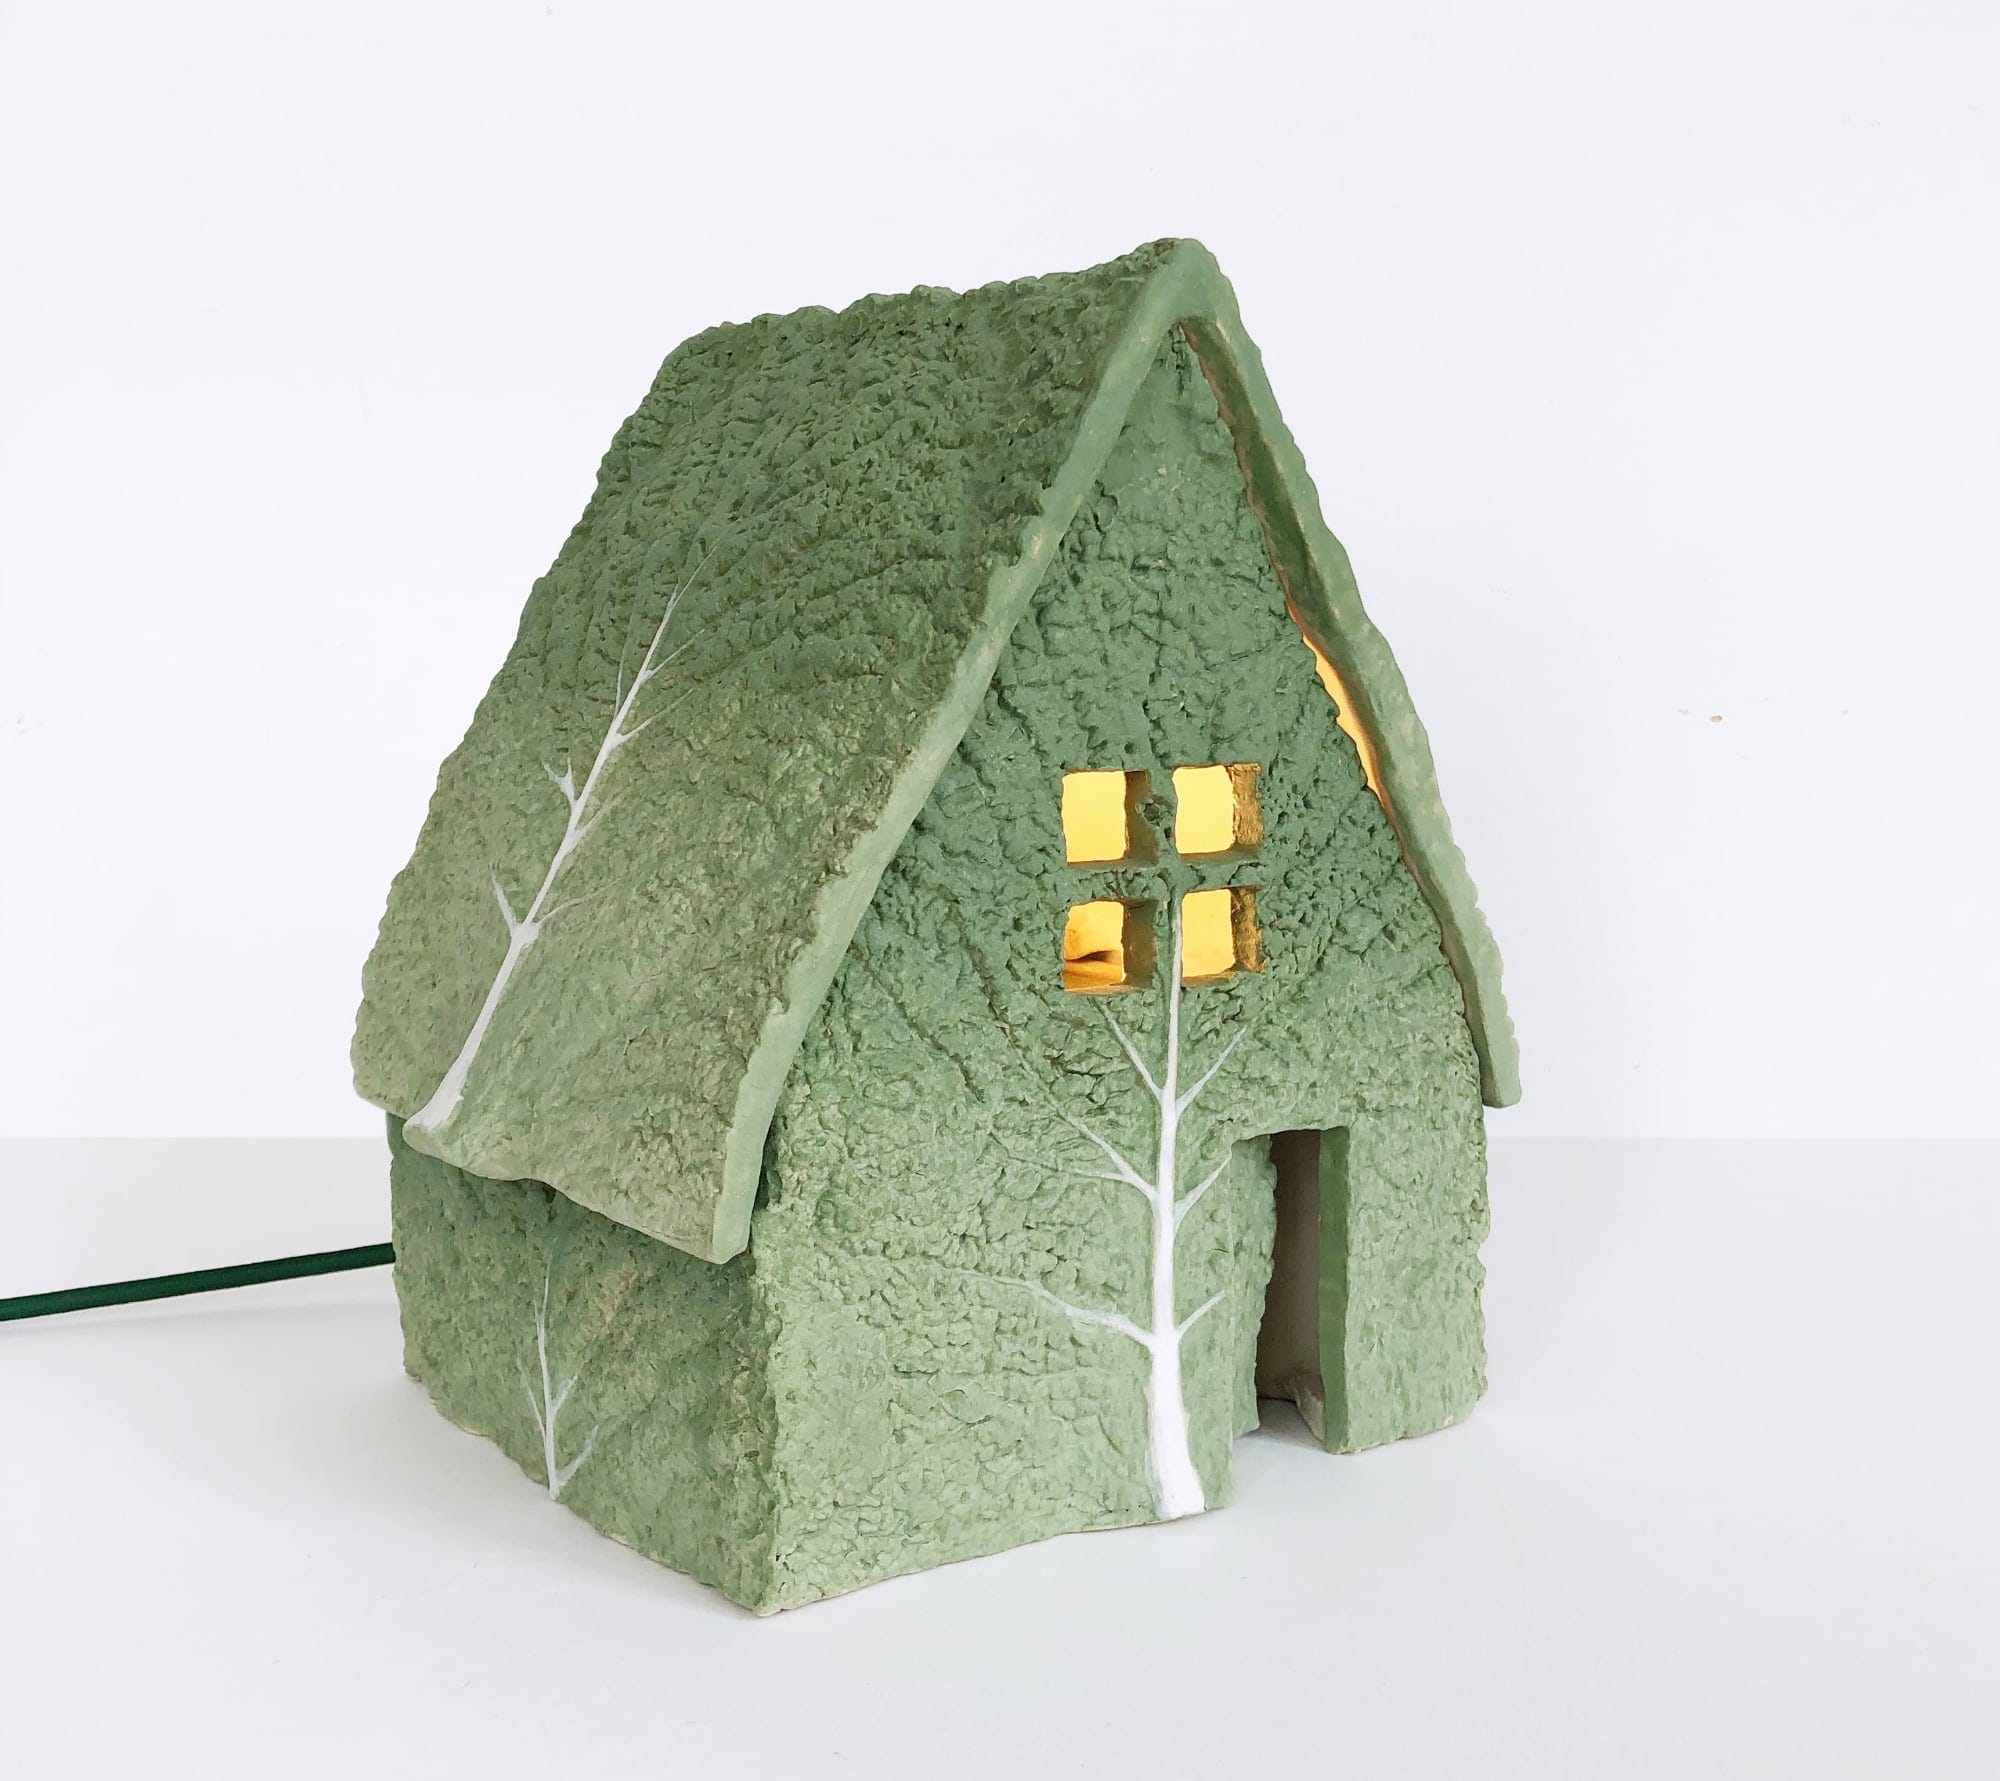 ceramic green cabbage leaves form a house structure with a light inside